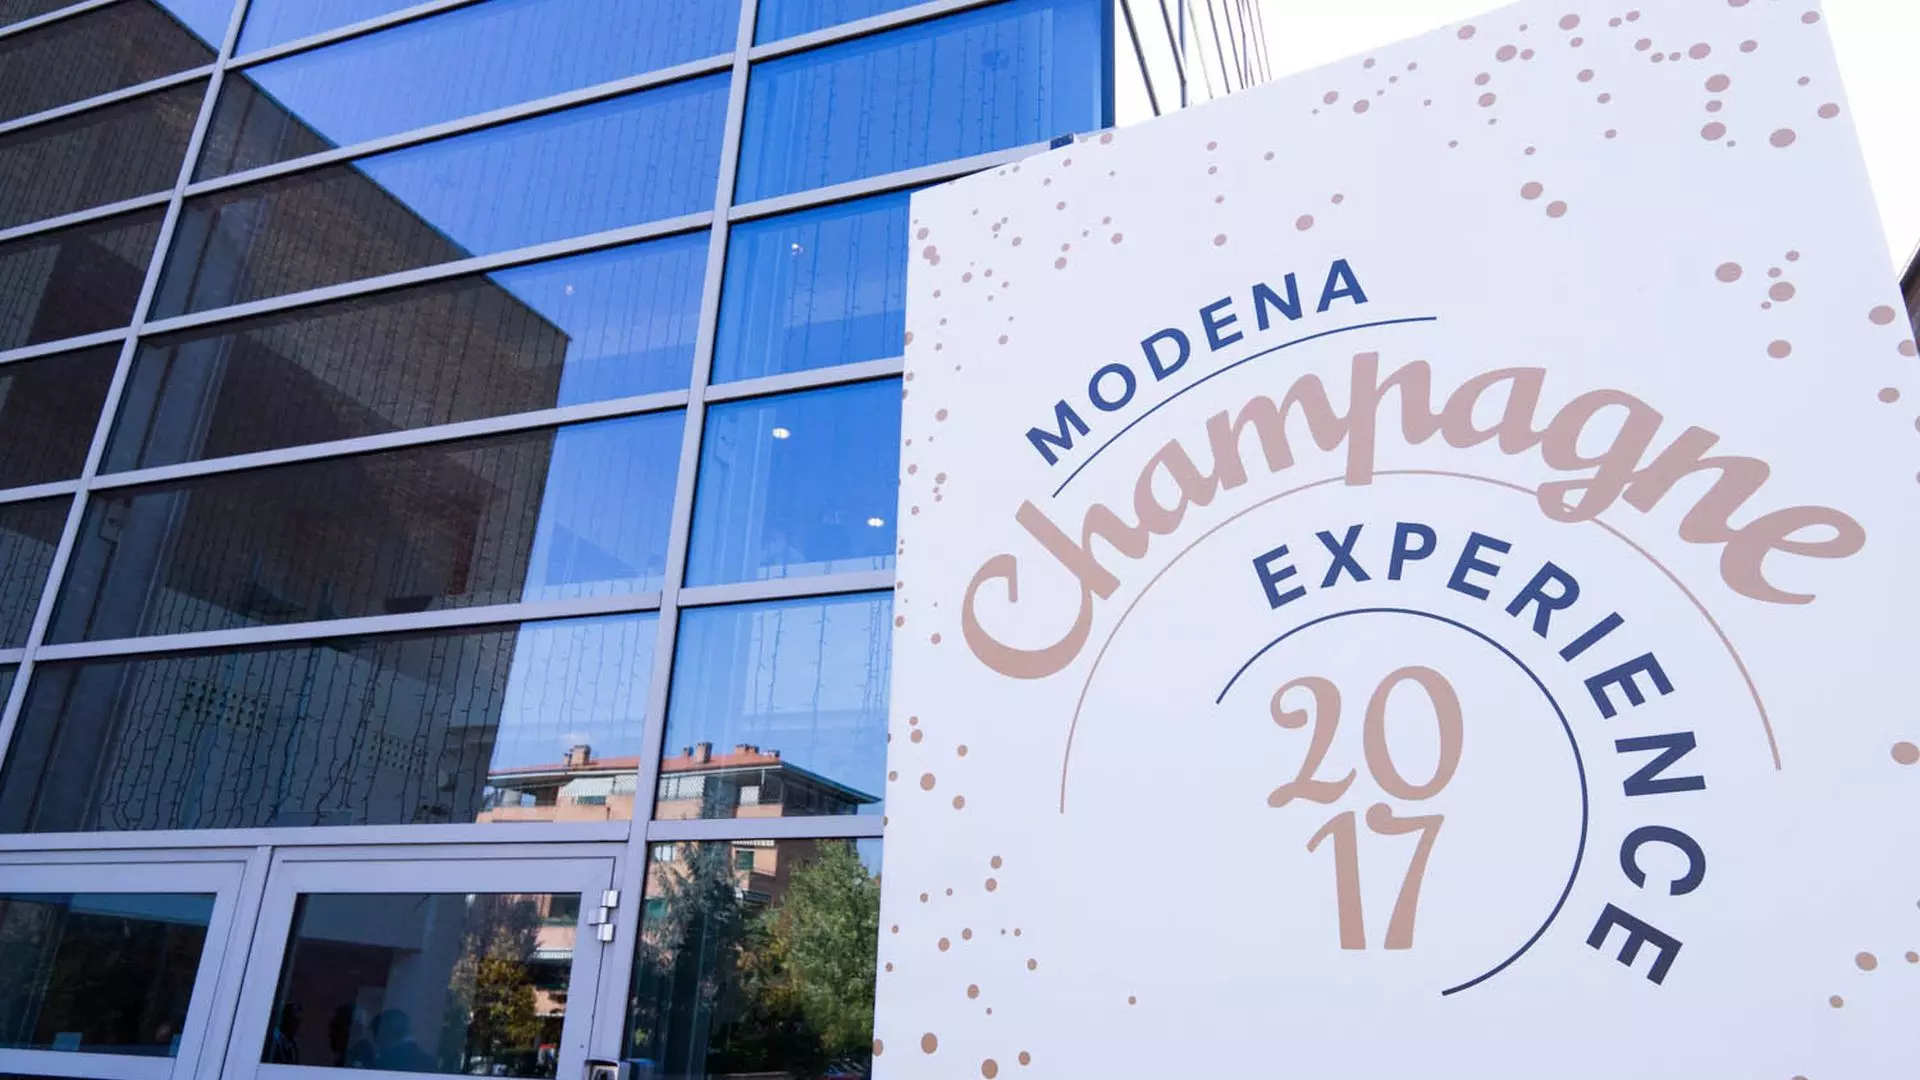 Modena Champagne Experience 2022